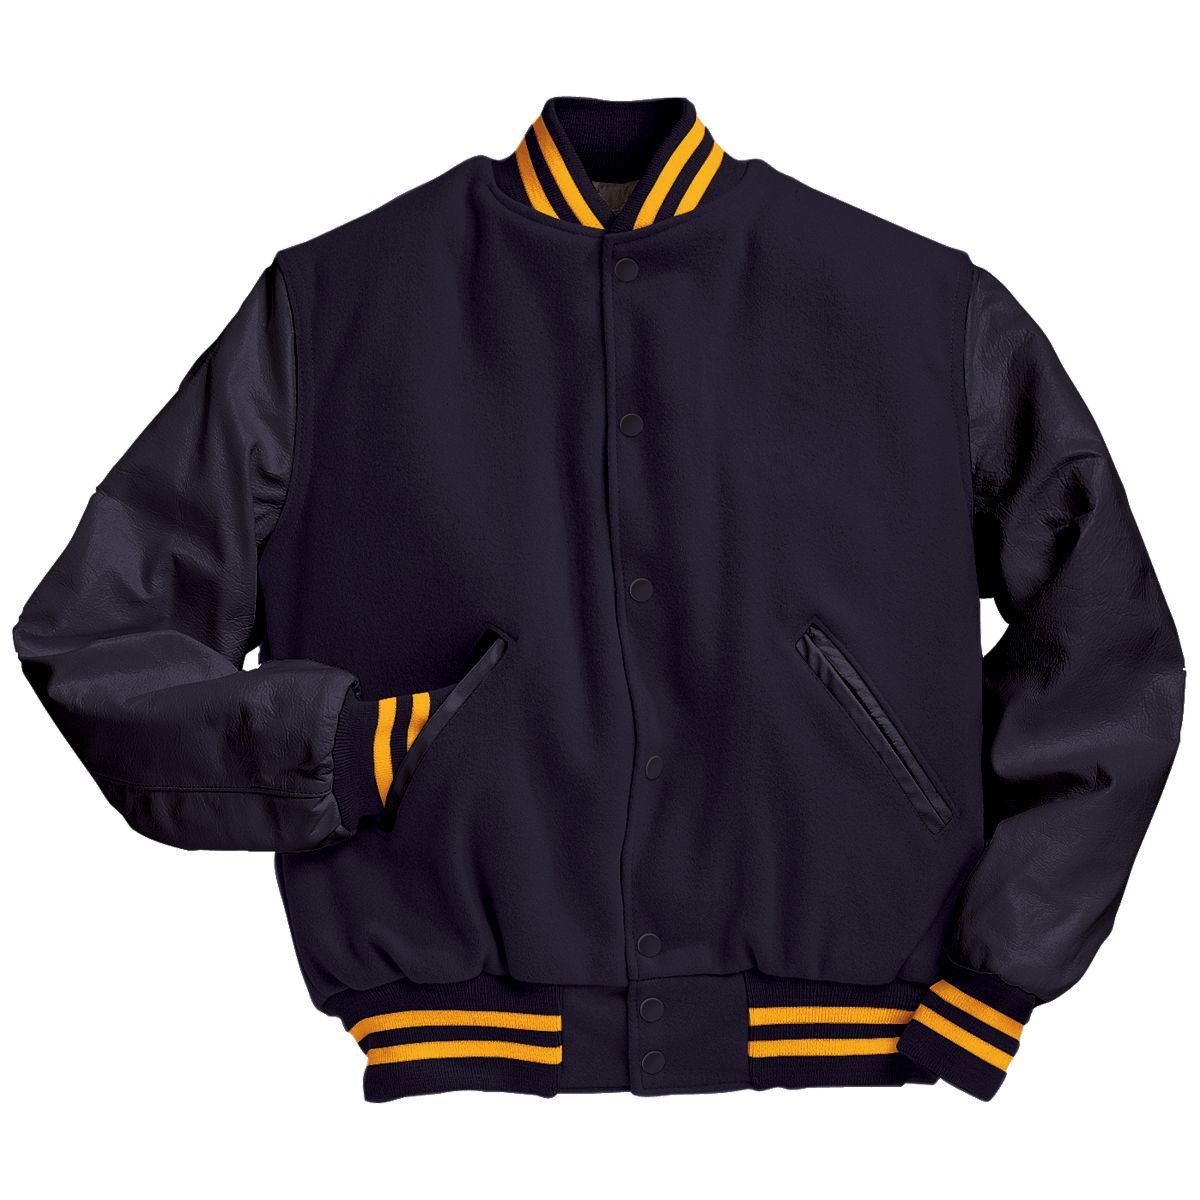 Holloway Varsity Tall Jacket in Dark Navy/Dark Navy/Light Gold  -Part of the Adult, Adult-Jacket, Holloway, Outerwear product lines at KanaleyCreations.com